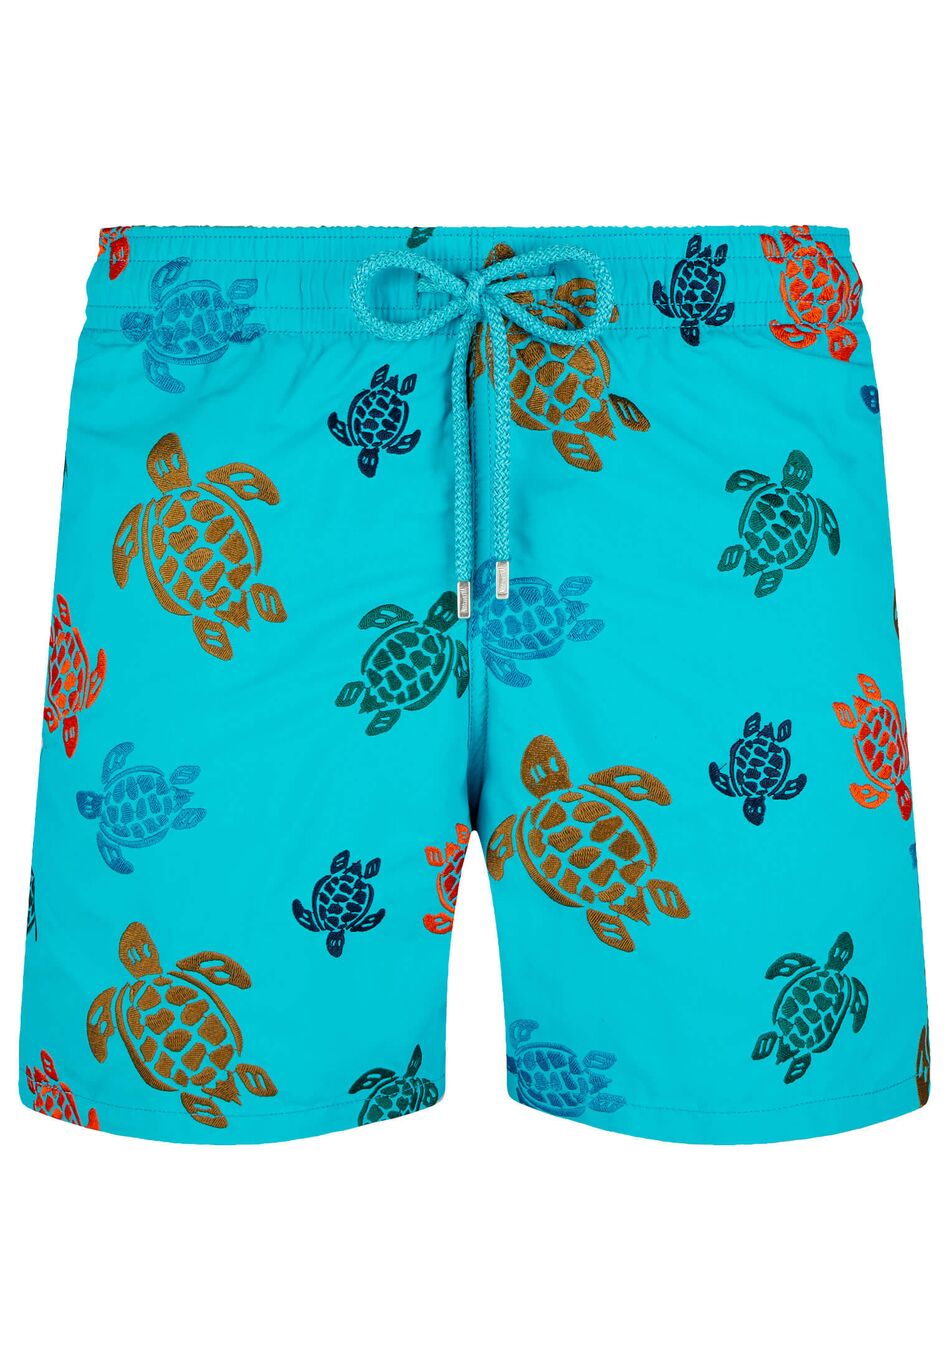 Embroidered Swim Shorts Ronde Des Tortues - Limited Edition